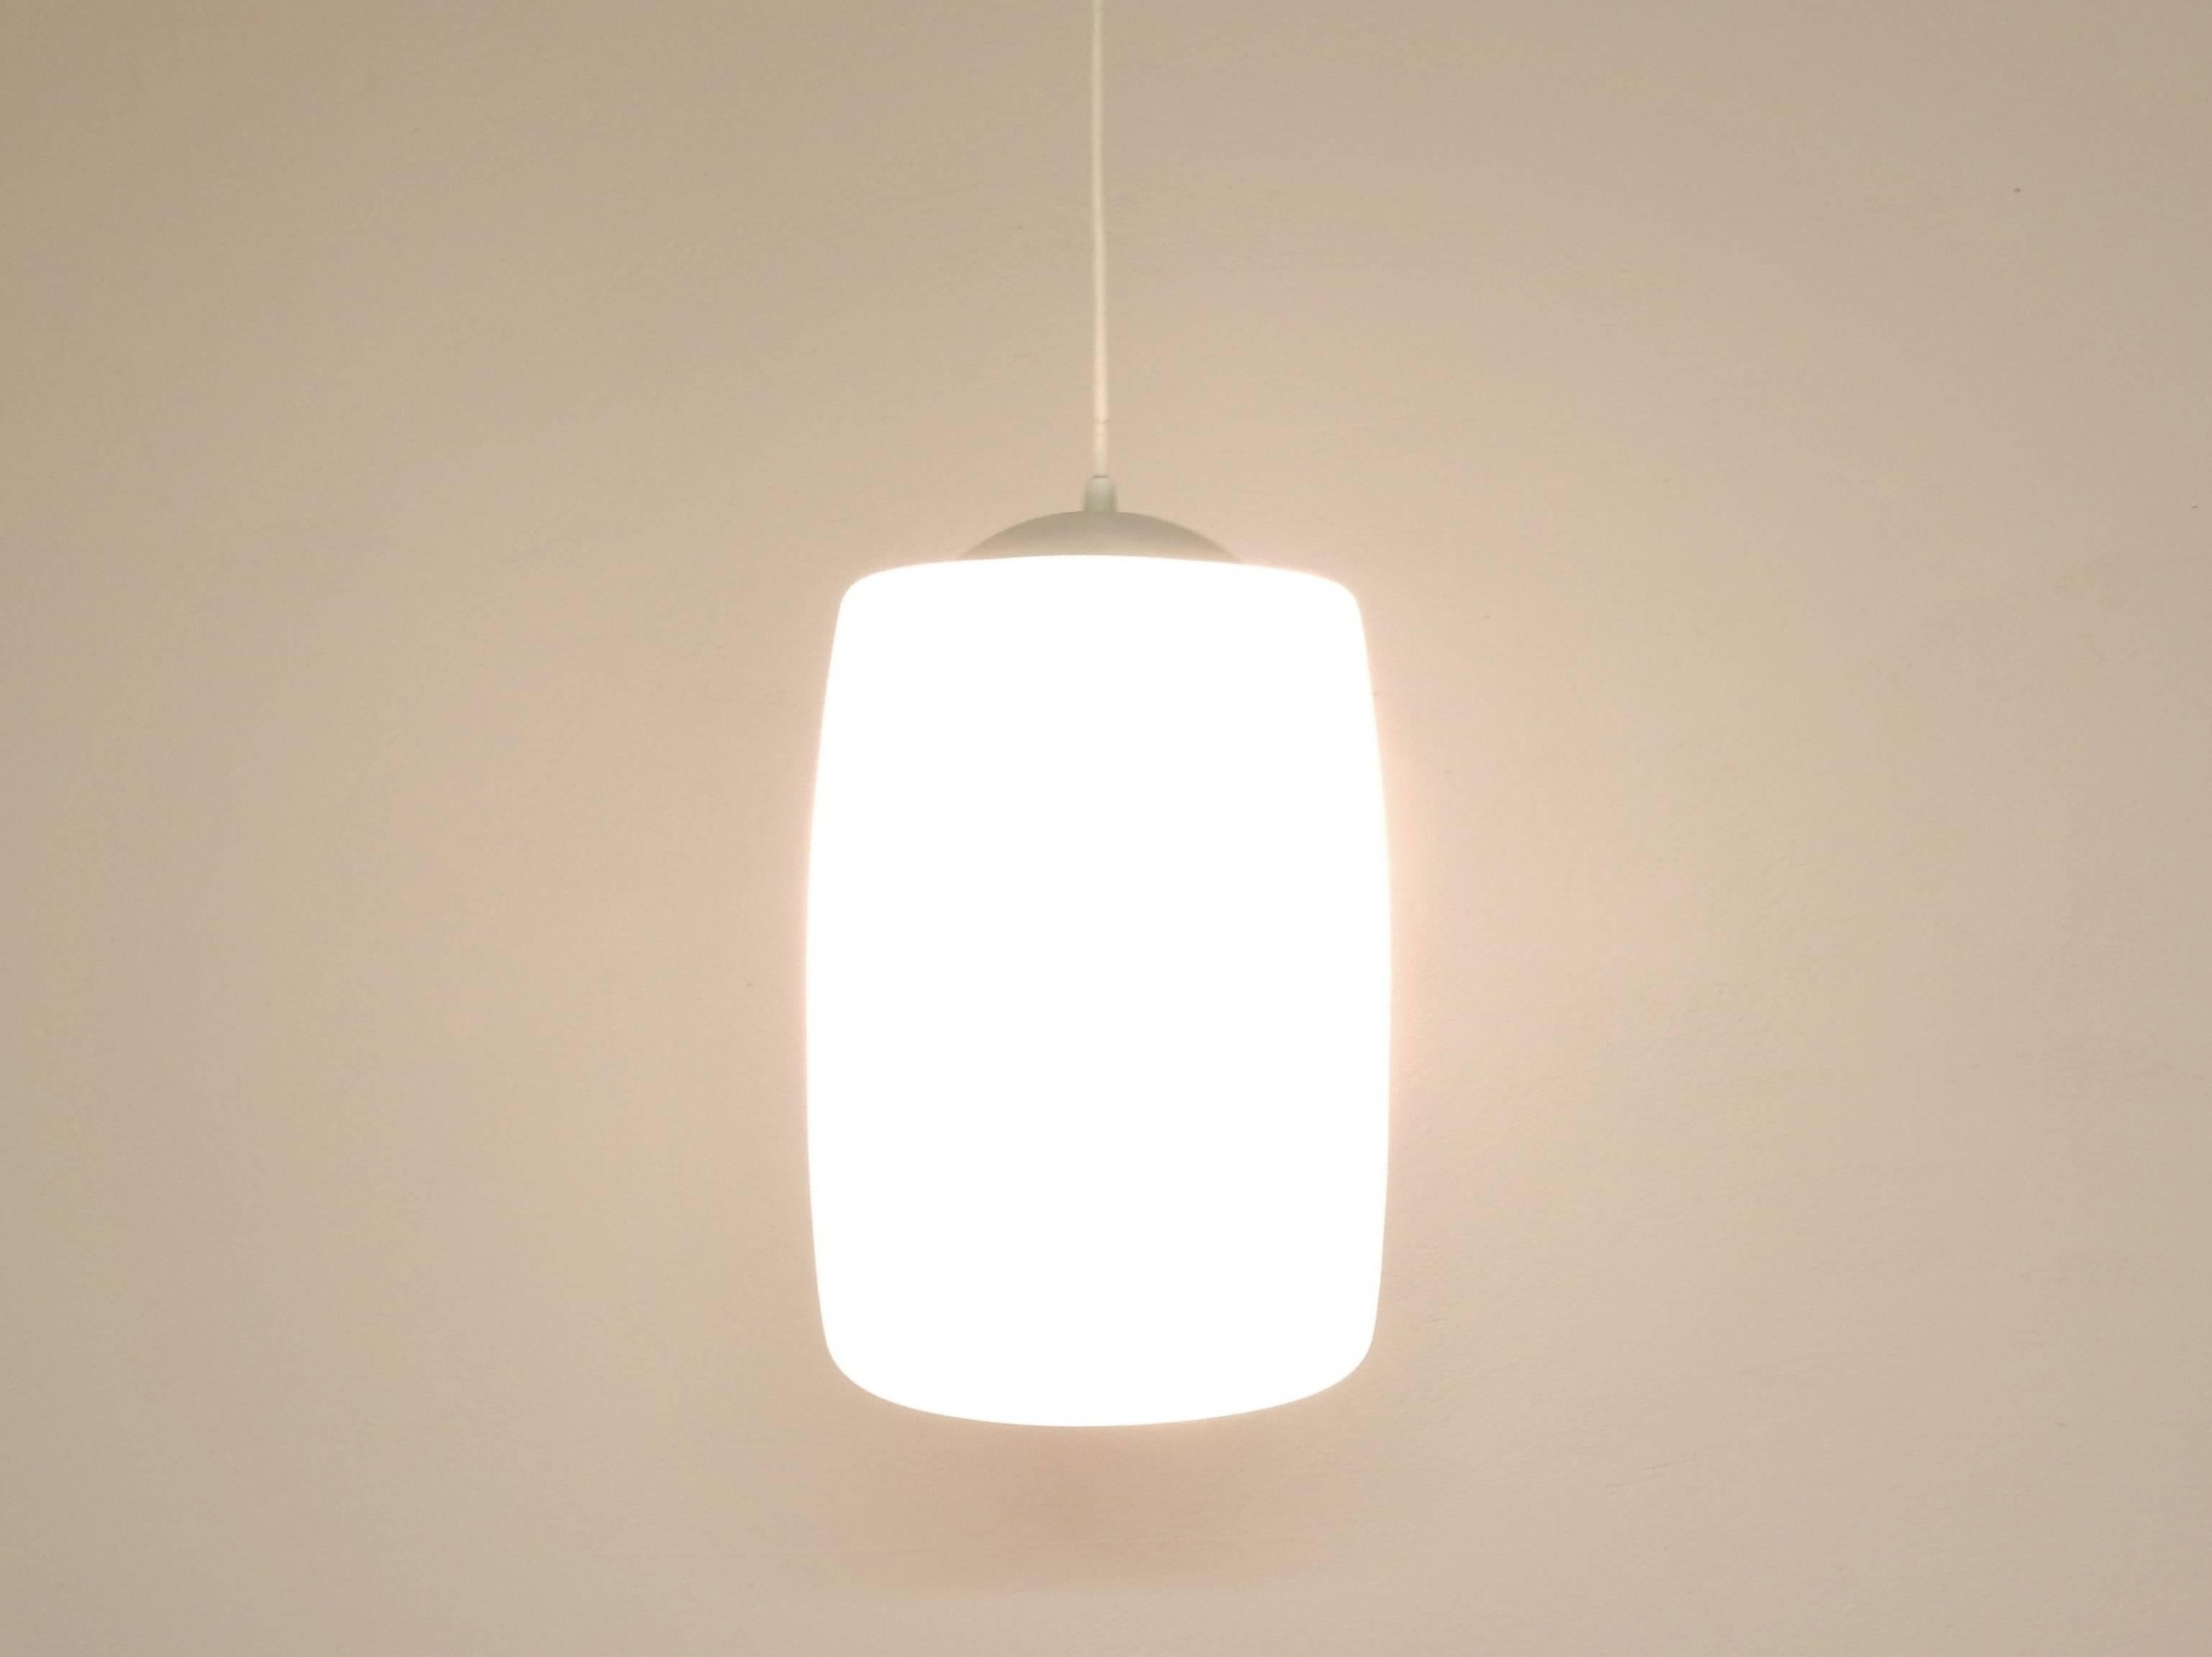 We have 42 of these glass pendant lights available from a church building from the Netherlands. With a purchase of more more lights (7+) we can include the original canopy and fixtures that will allow you to group up to 7 lights.

All lights are